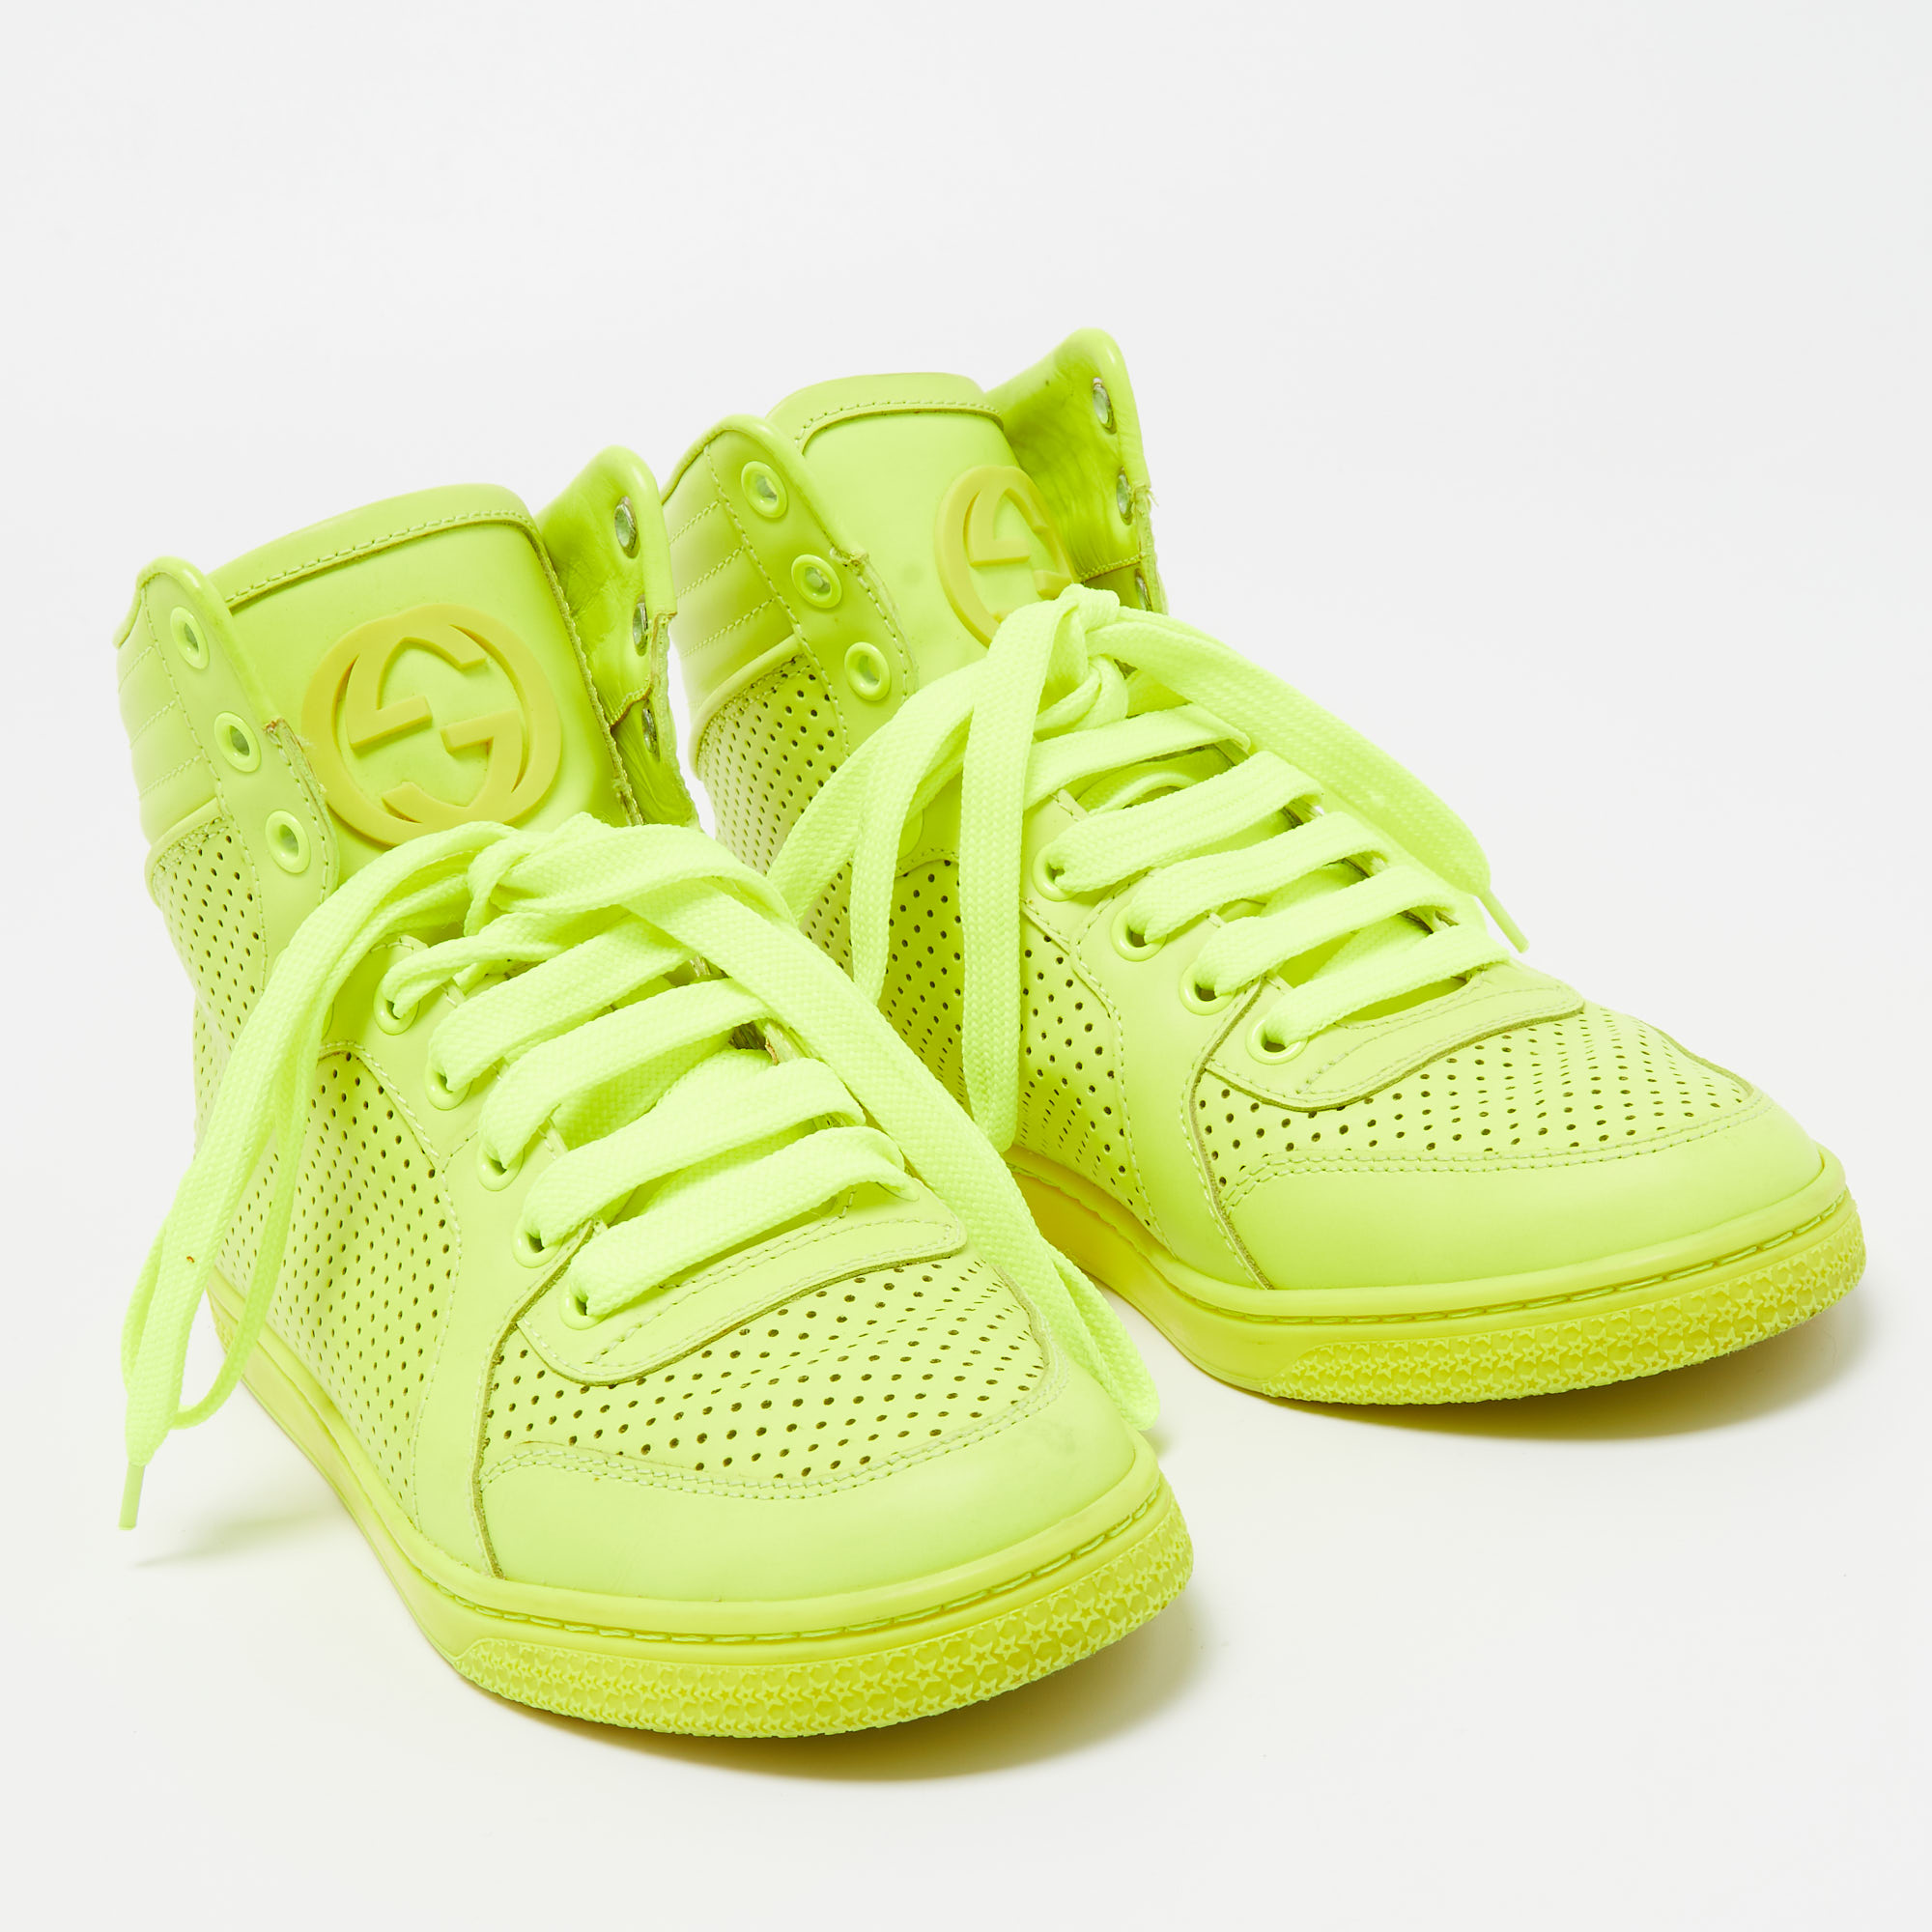 Gucci Neon Green Leather High Top Sneakers Size 35.5